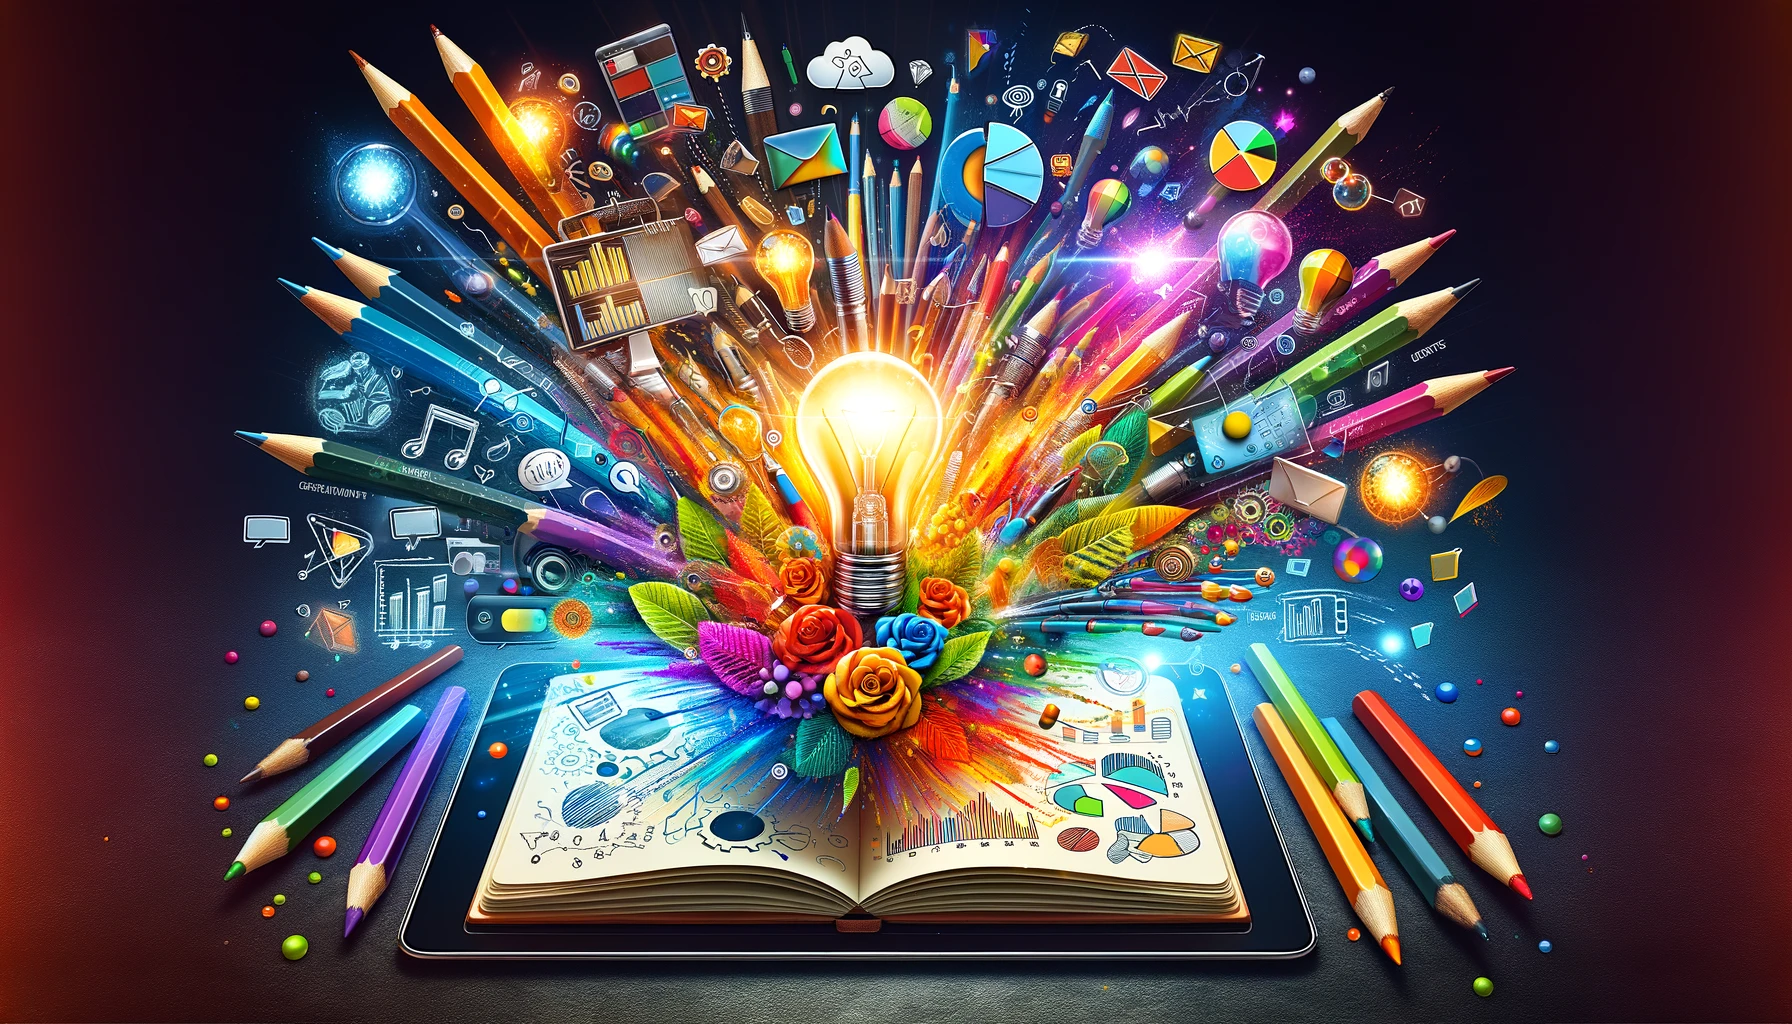 Image encapsulating 'Engaging Blog Content', featuring an open notebook or digital tablet with a burst of creative elements like colorful pens, light bulbs, charts, and imagery, symbolizing the brainstorming to beautification process of captivating blog creation.